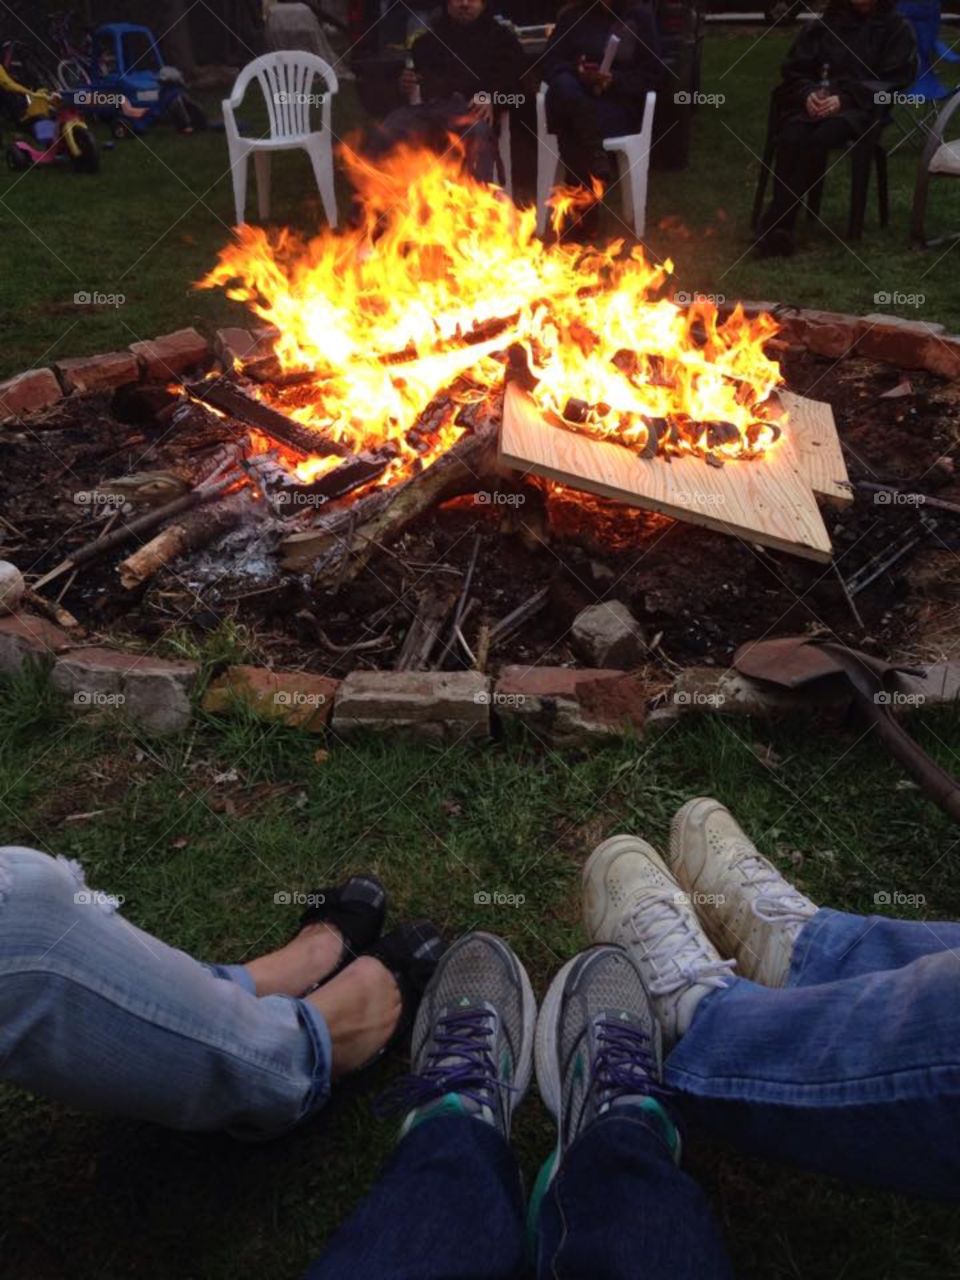 Feet by the heart of the a fire (Friends)